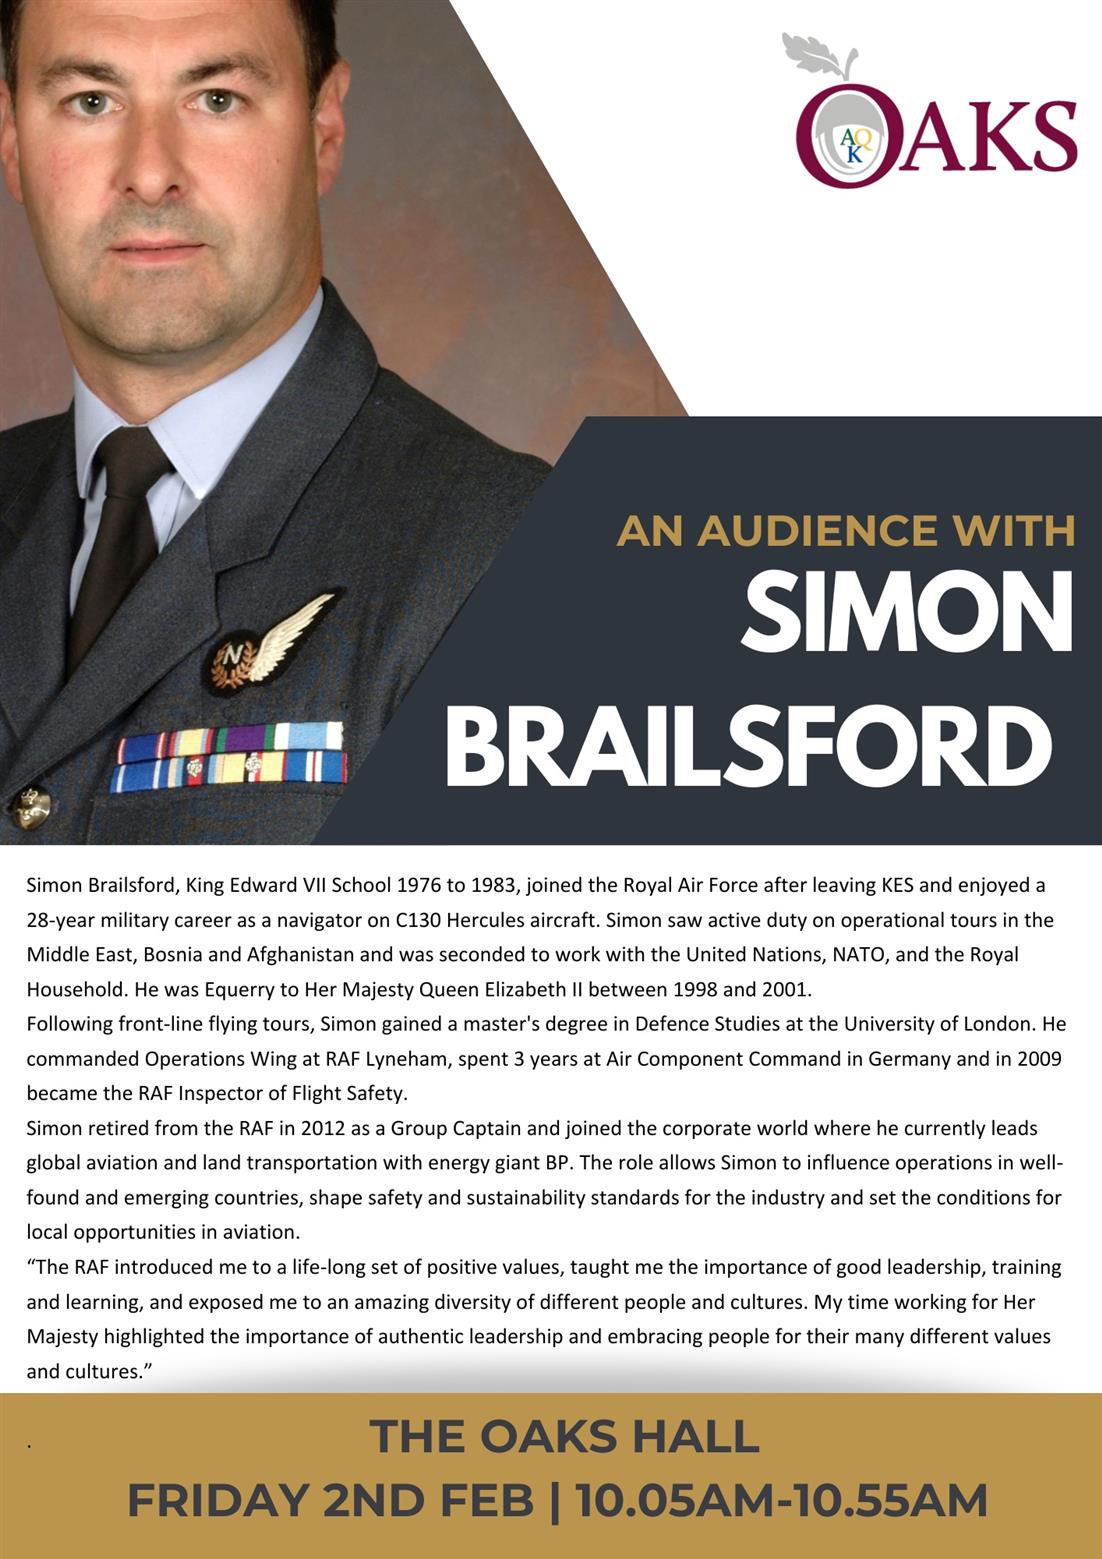 An Audience with Simon Brailsford